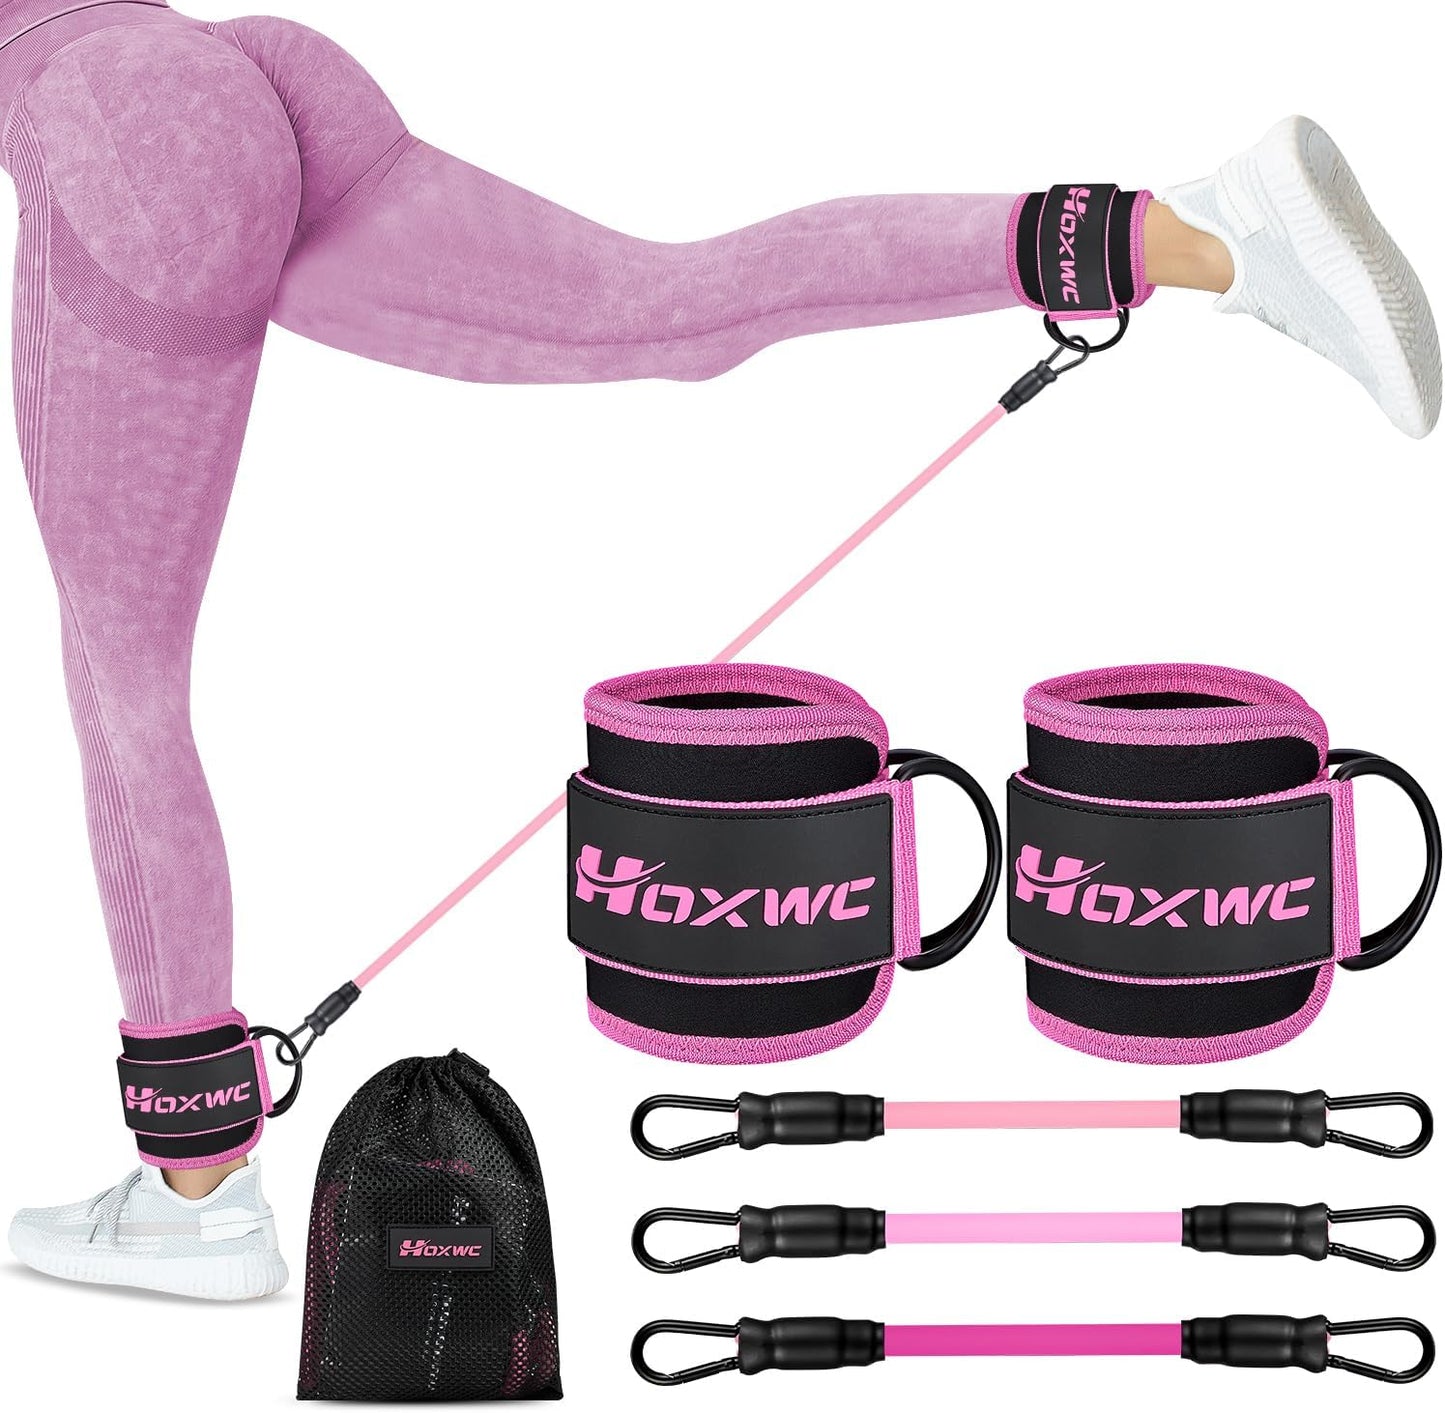 NOTABLE HOXWC Ankle Resistance Bands with Cuffs, Ankle Bands for Working Out, Ankle Resistance Band for Leg, Booty Workout Equipment for Kickbacks Hip Fitness Training, Exercise Bands for Butt Lift Women